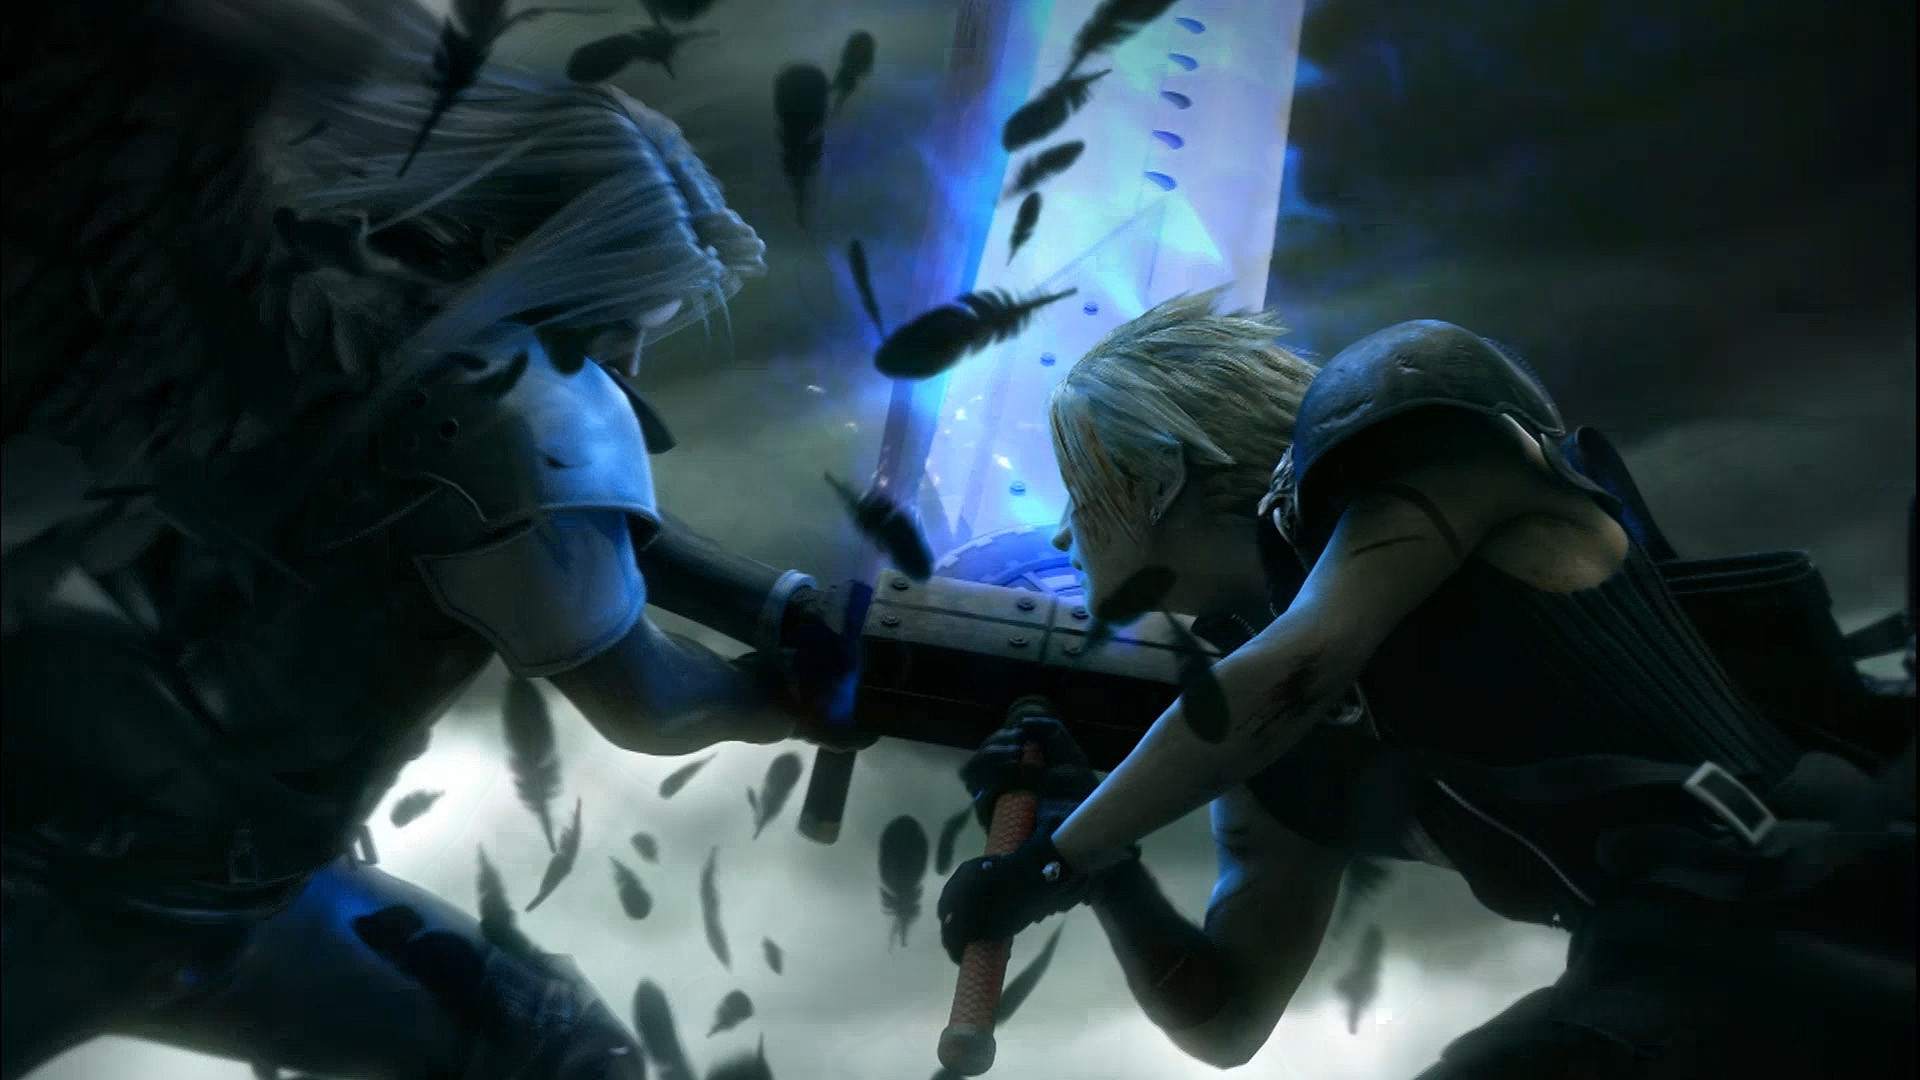 1920x1080 competence/mastery-Final Fantasy was the most epic animation for me. It made